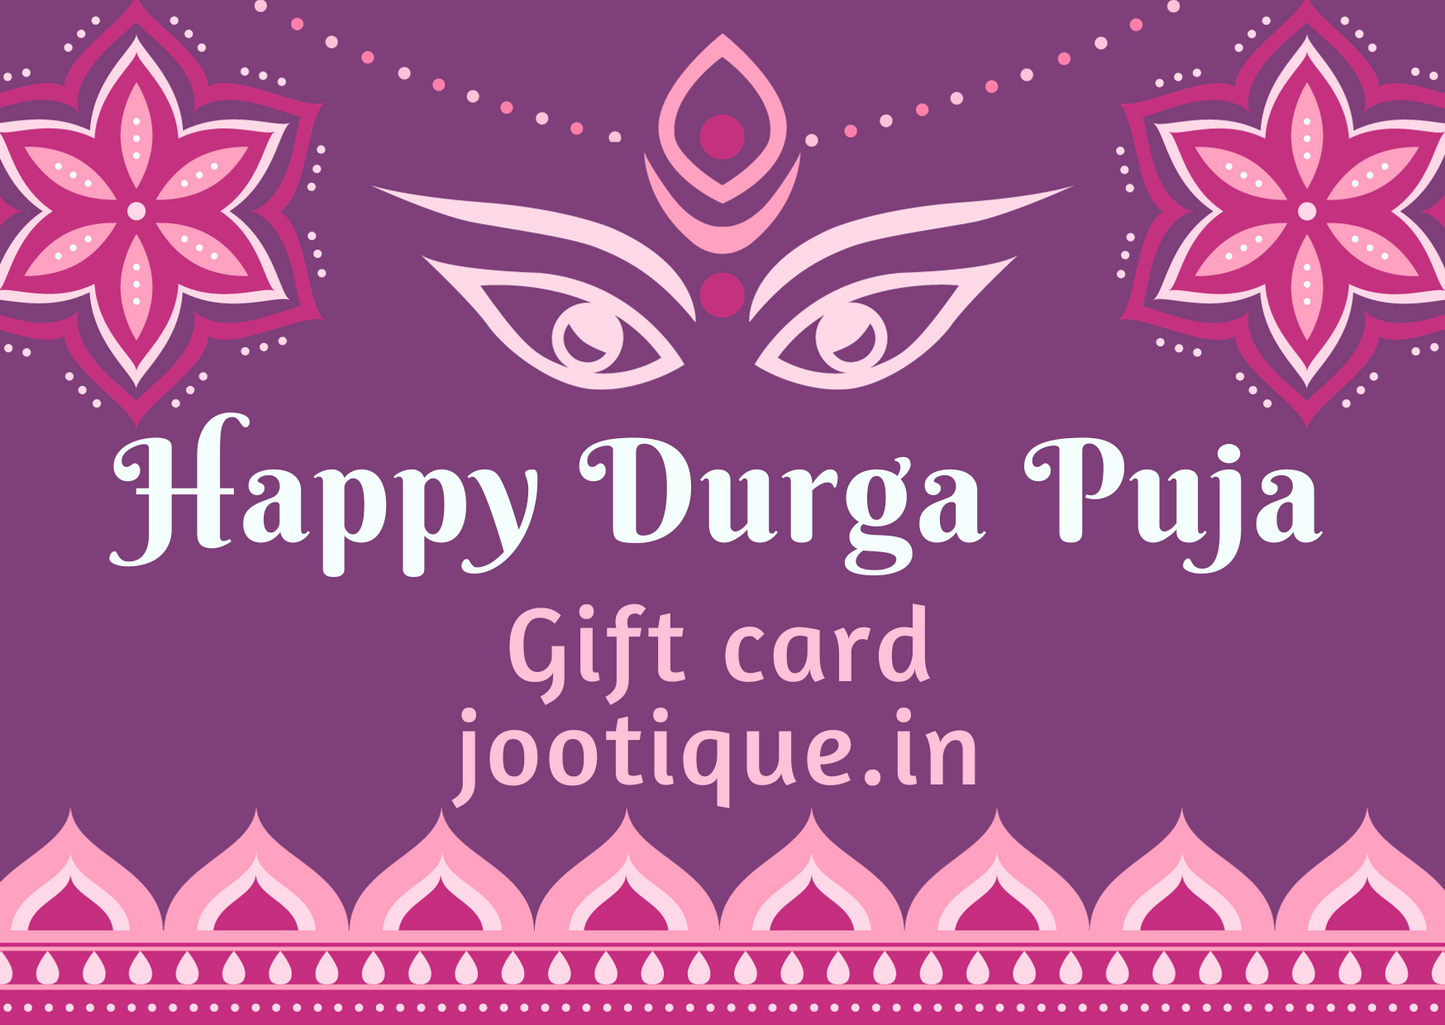 Jootique Durga Puja Gift Card - Embrace the Divine Blessings